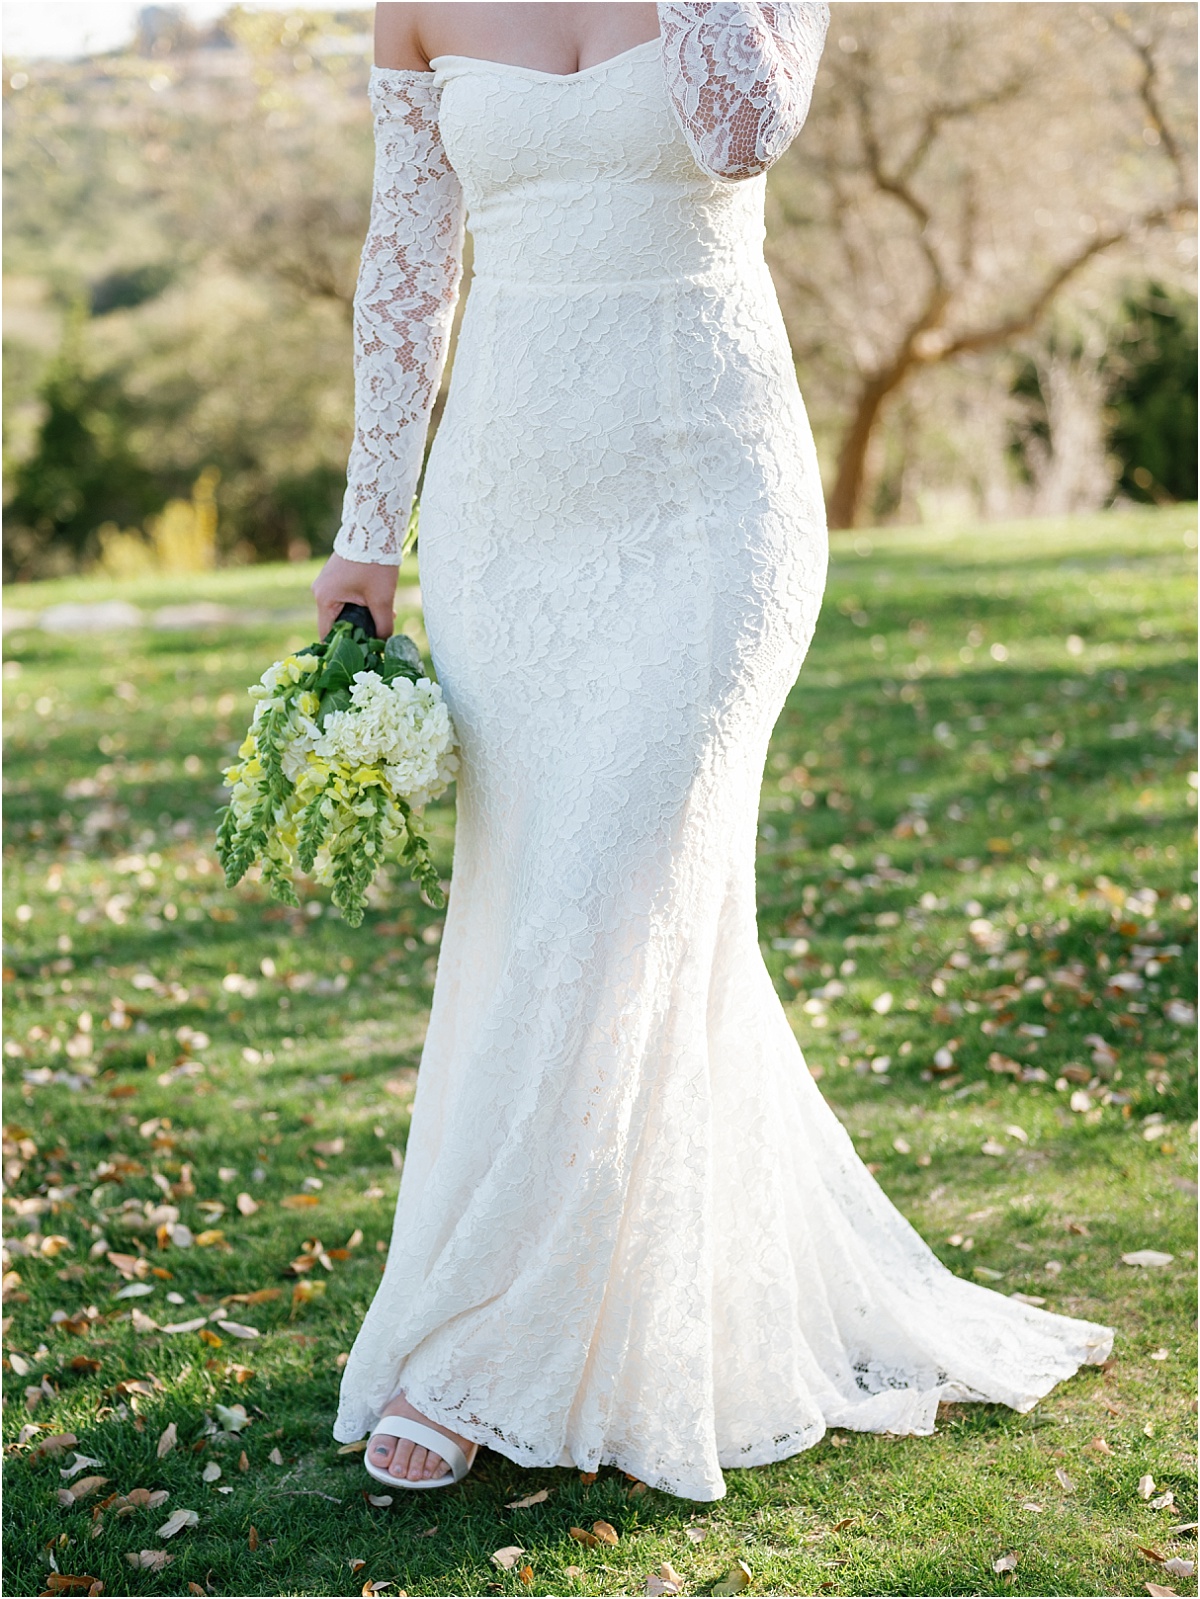 Bride in her wedding dress at Canyonwood Ridge in Dripping Springs, Texas